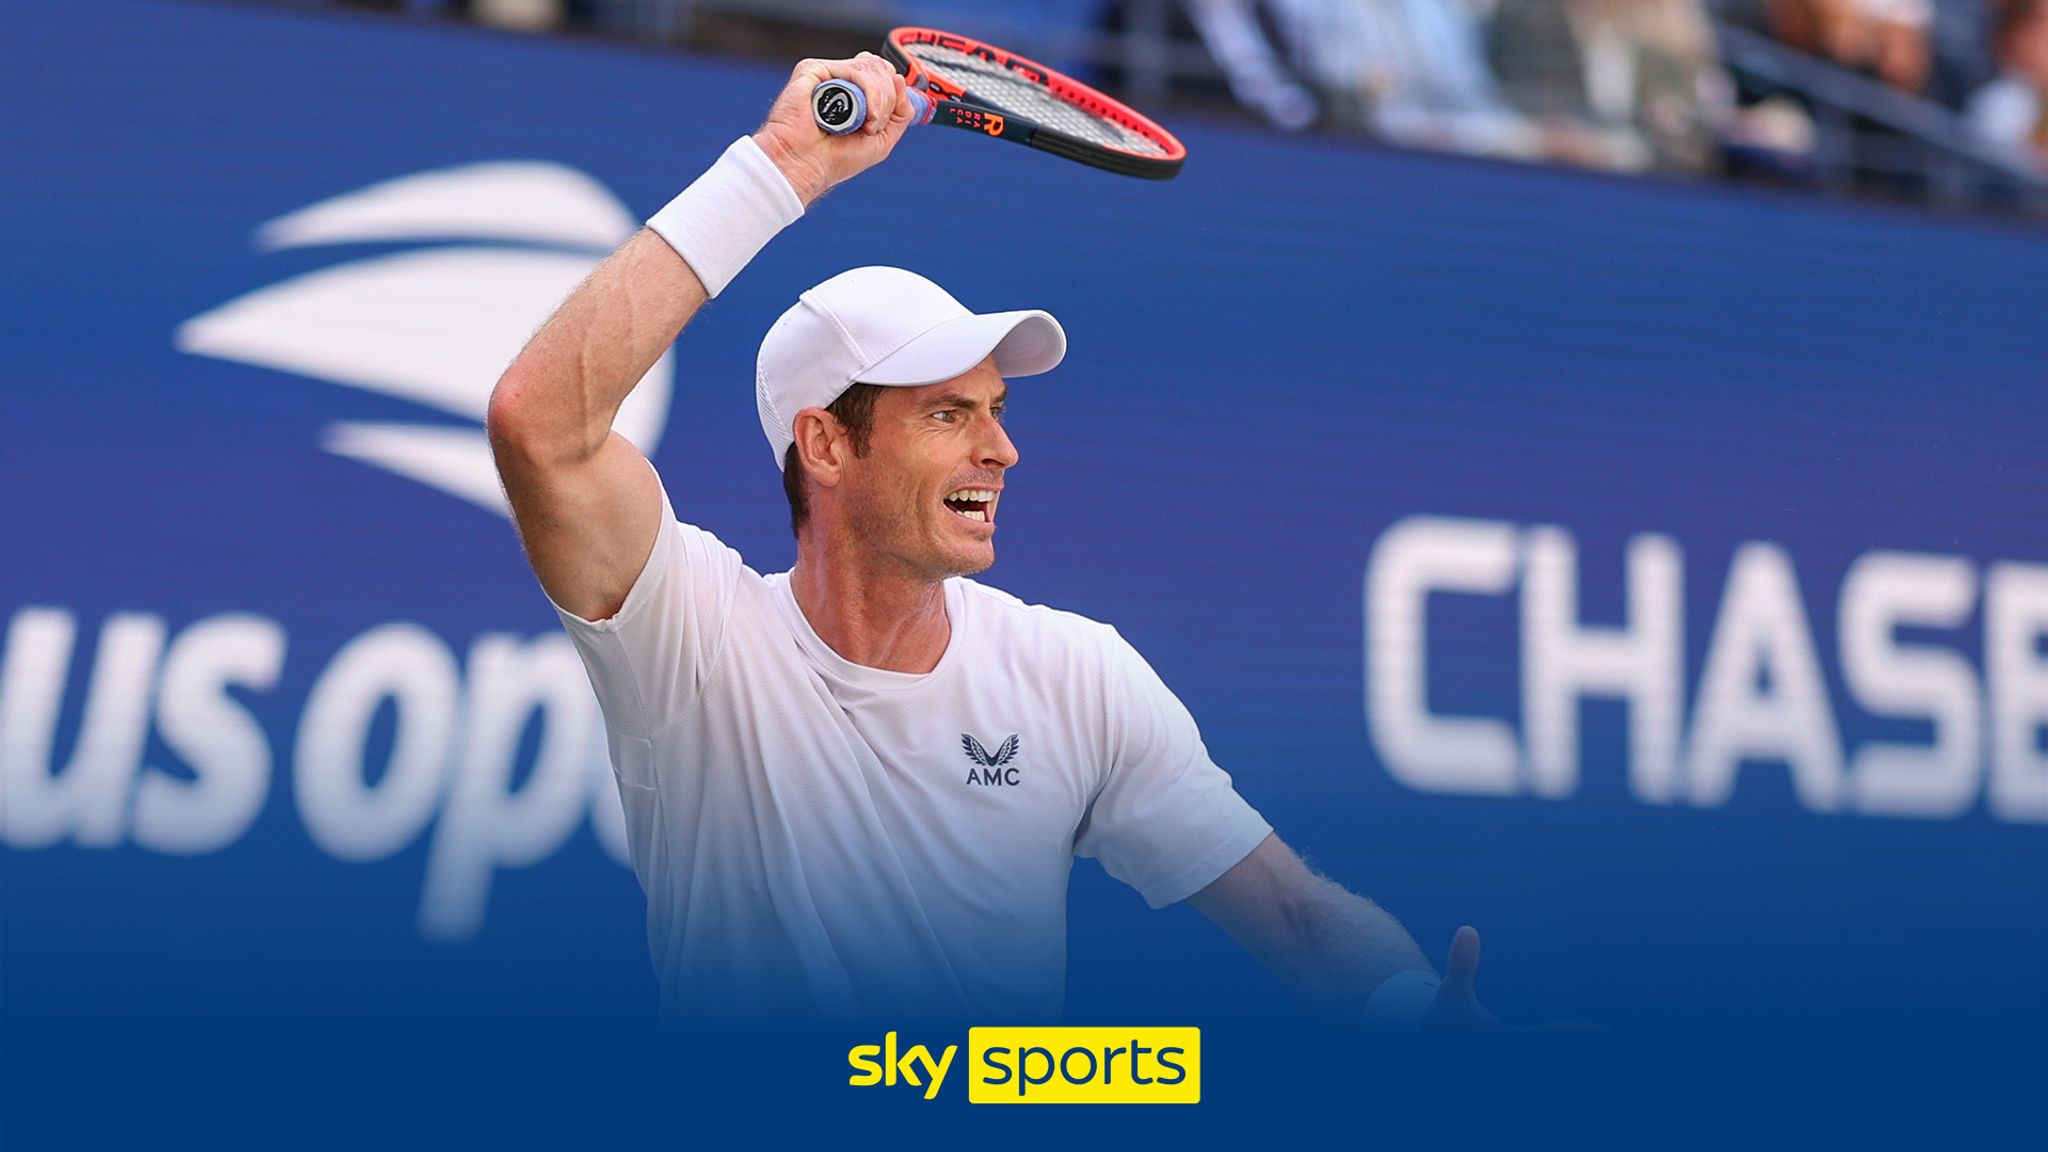 Can Andy Murray still make a run in a Grand Slam? He has more tennis in him Tennis News Sky Sports